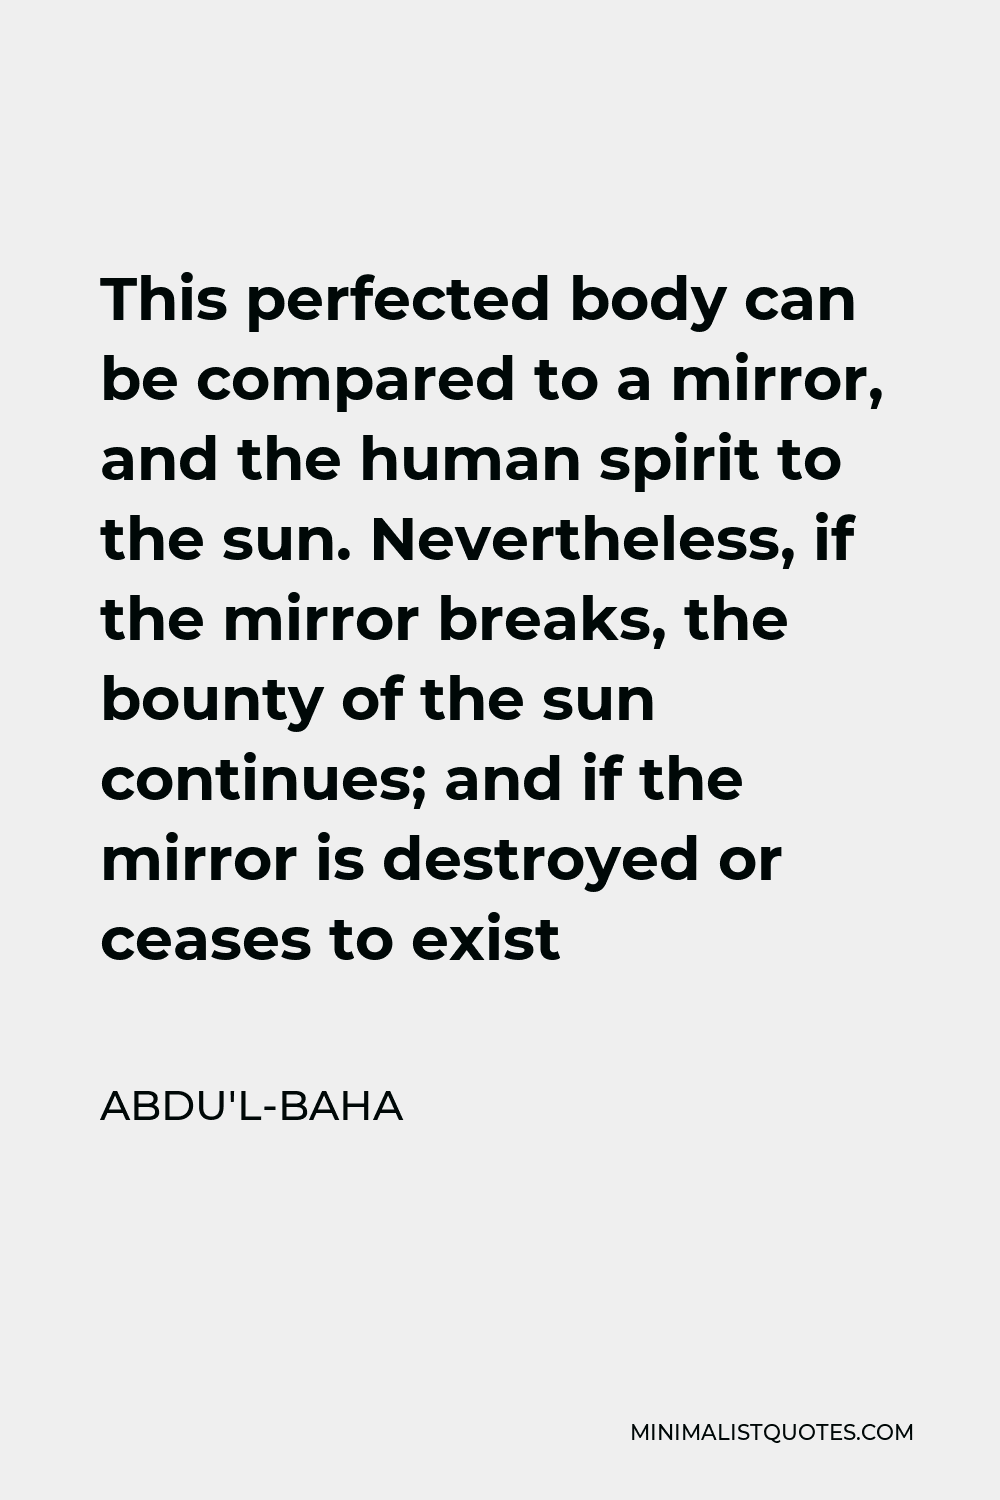 Abdu'l-Baha Quote - This perfected body can be compared to a mirror, and the human spirit to the sun. Nevertheless, if the mirror breaks, the bounty of the sun continues; and if the mirror is destroyed or ceases to exist